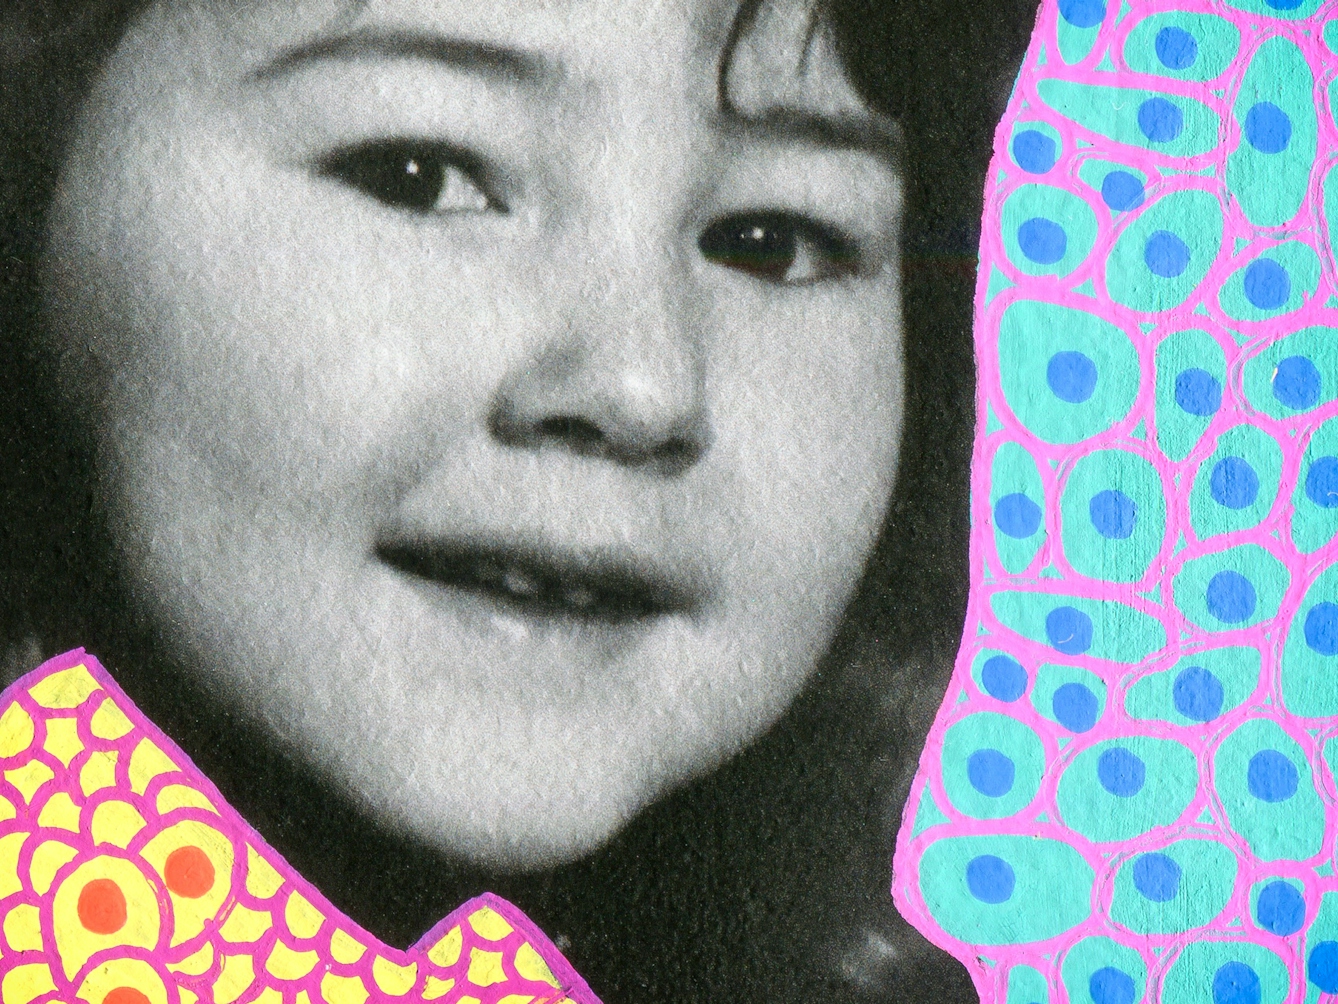 Artwork created by painting over the surface of a black and white photographic print with colourful paint. The artwork shows the original head of a young girl from the photograph beneath. The girl's face almost fills the image and she is smiling to the camera. Apart from her head and face, the rest of the image is a painted cyan background covered in small blue dots and purple lines forming cell like structures around the blue dots. The girl's clothes are painted differently, with a yellow background, covered in orange dots, surrounded by loops of purple lines, arranged almost like scales or feathers. The texture of the paint can be seen.